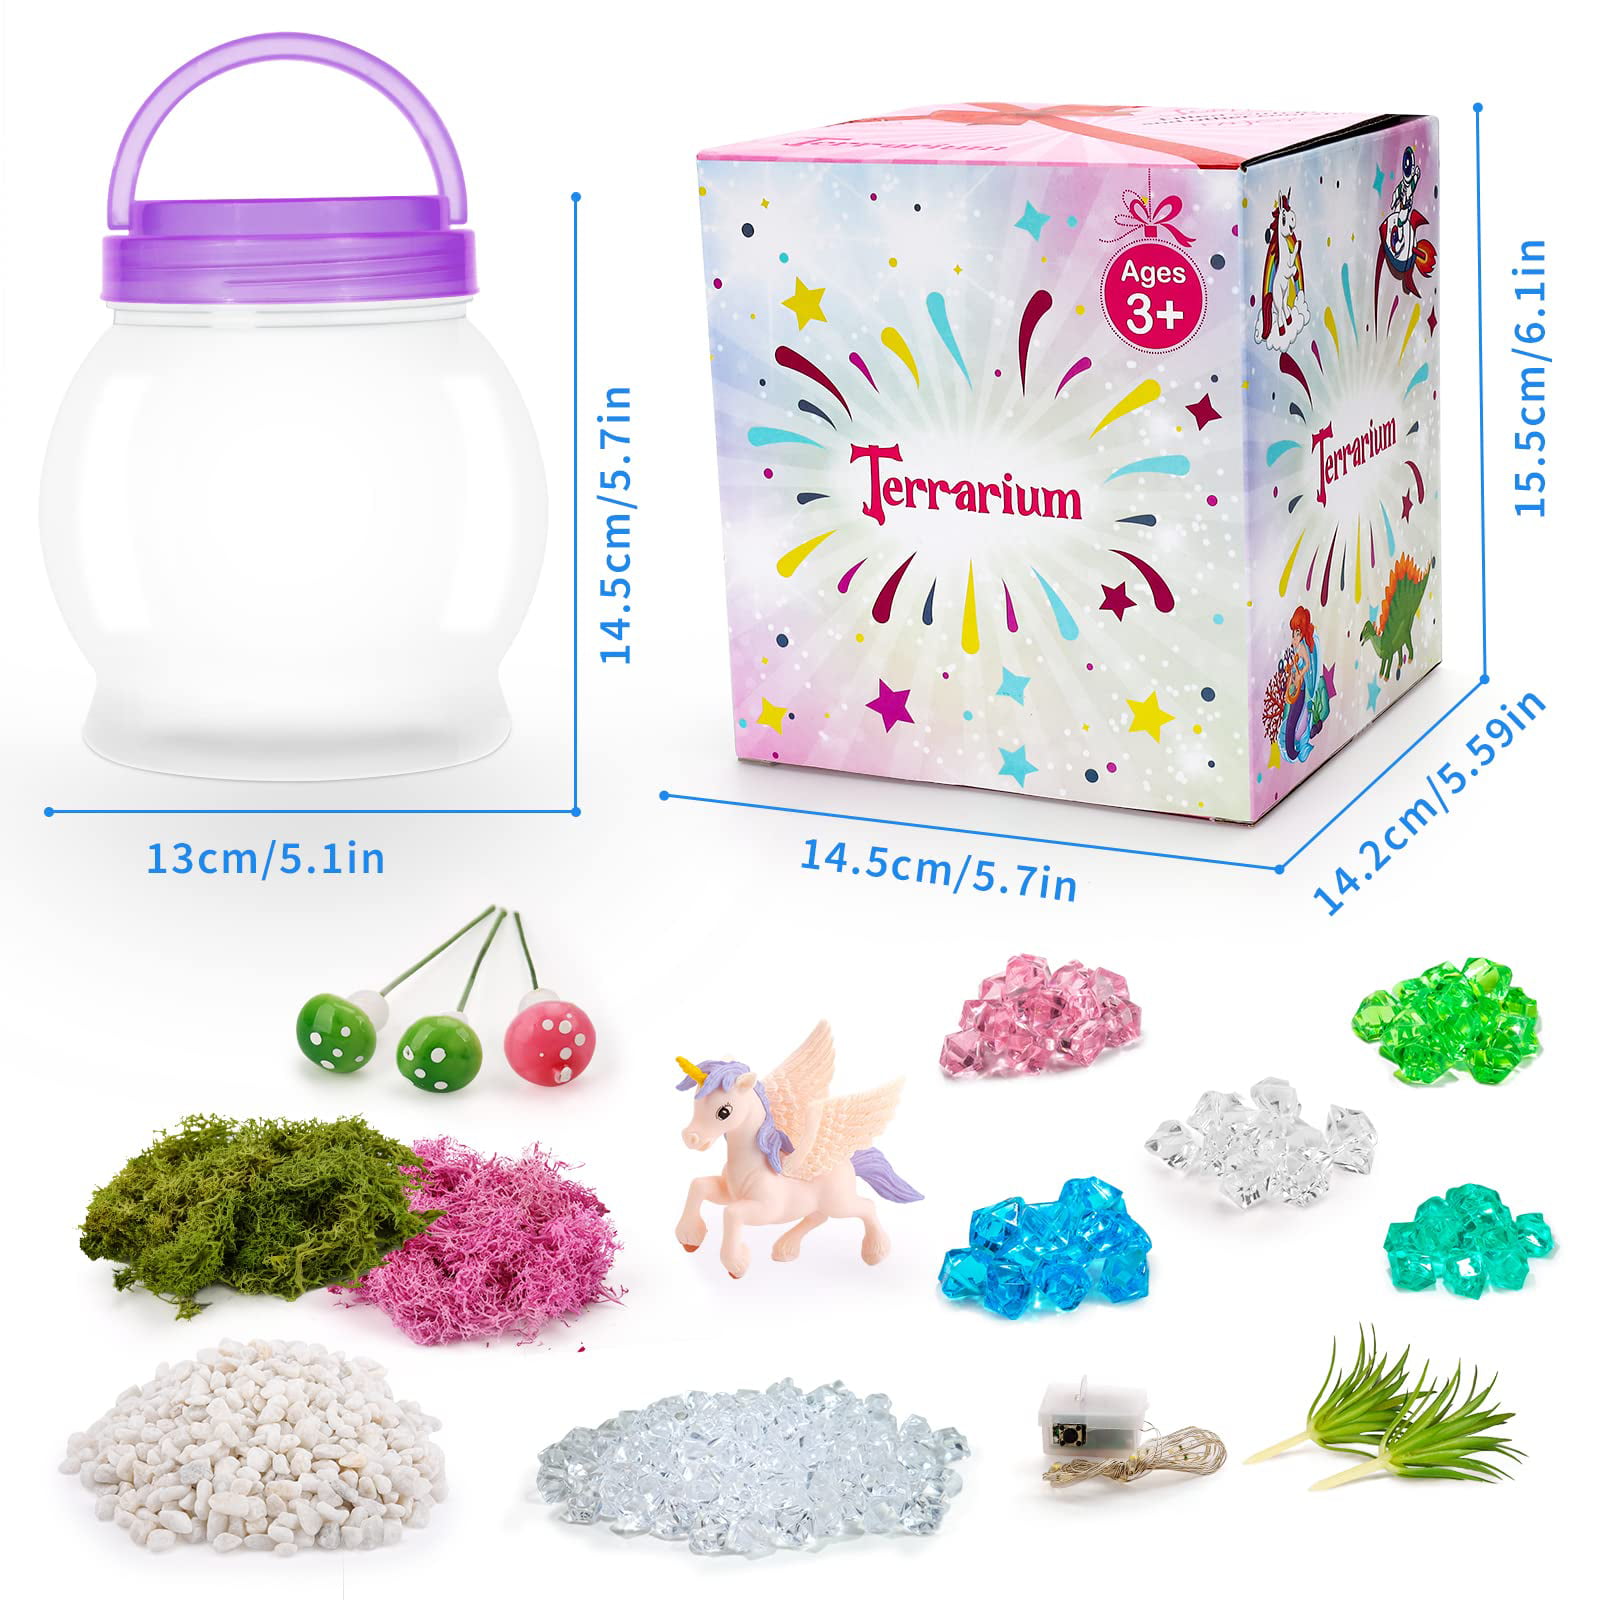 Make Your Own Night Light Kit - Light-Up Easter Egg Terrarium Craft Kit for  Pokemon - Arts & Crafts Activities Kit - Bedroom Decoration Gifts for 4 5